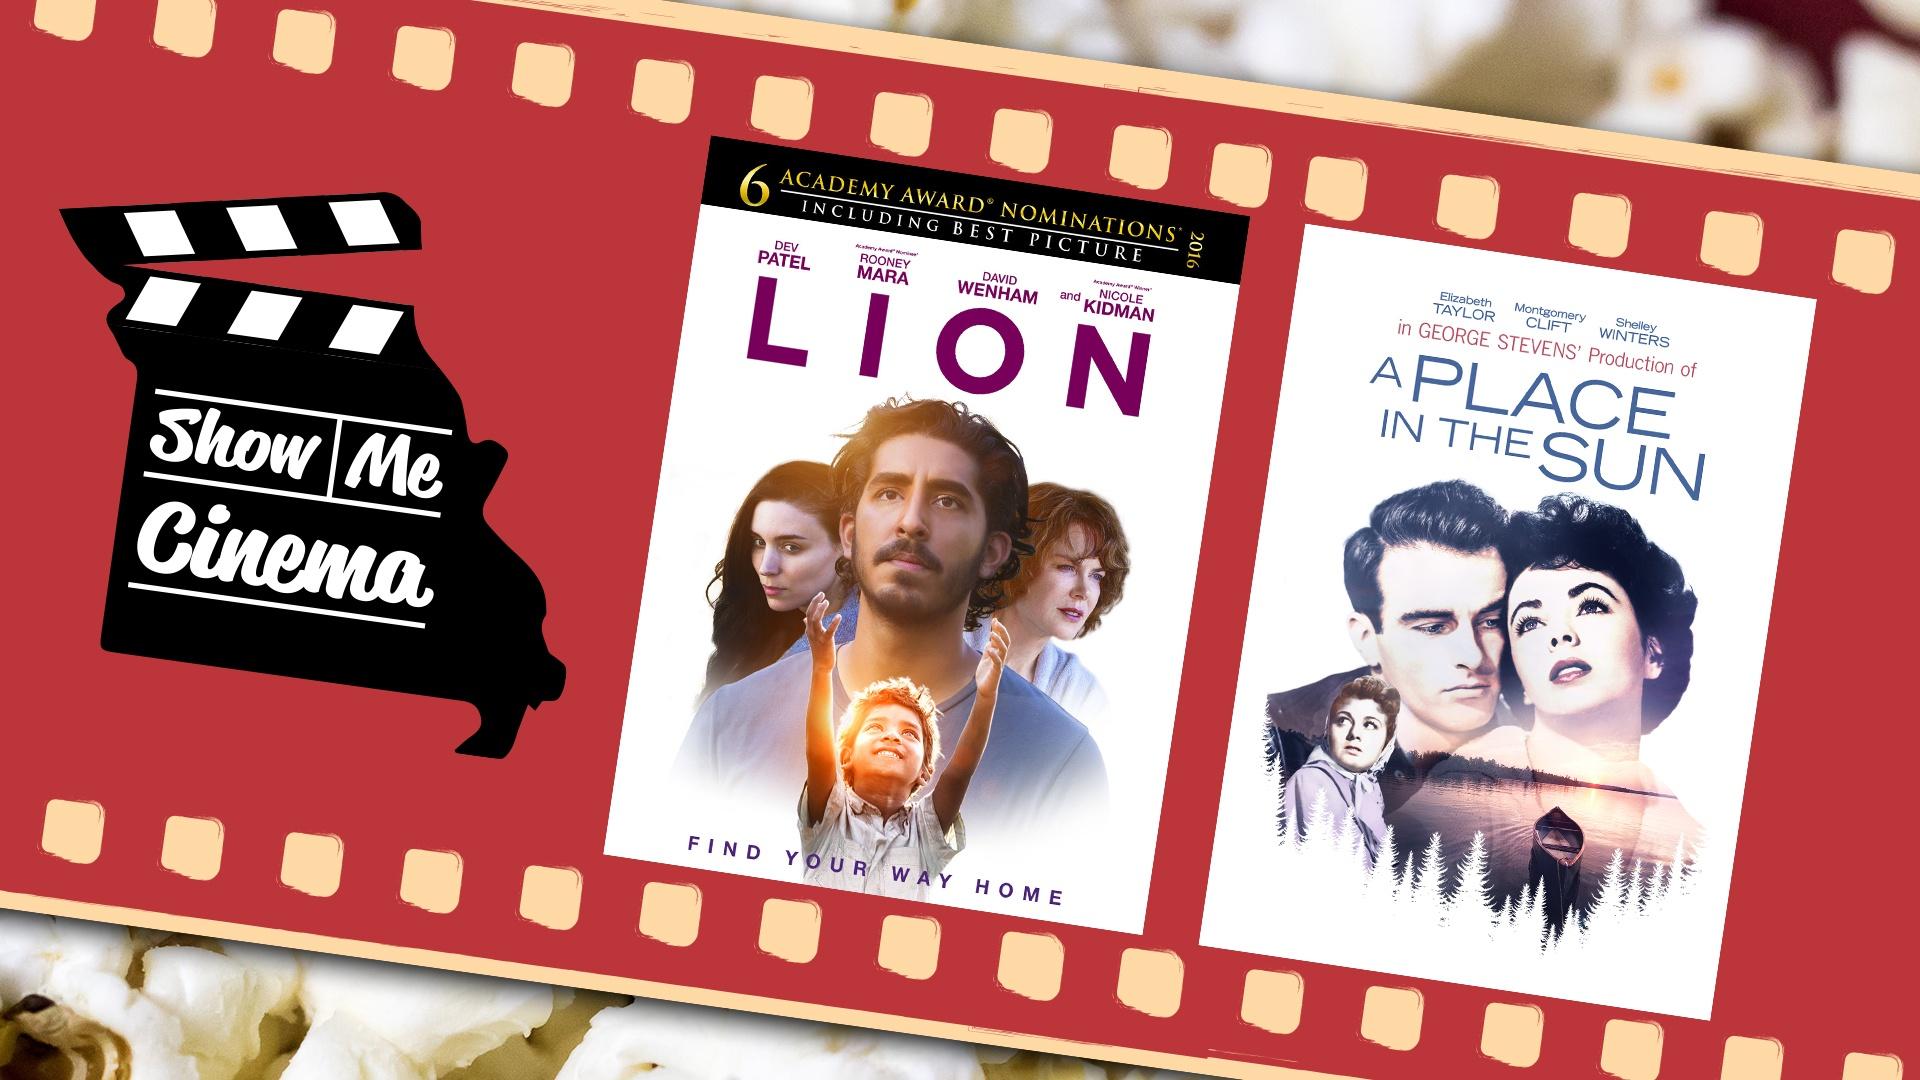 Show Me Cinema: Lion and A Place in the Sun